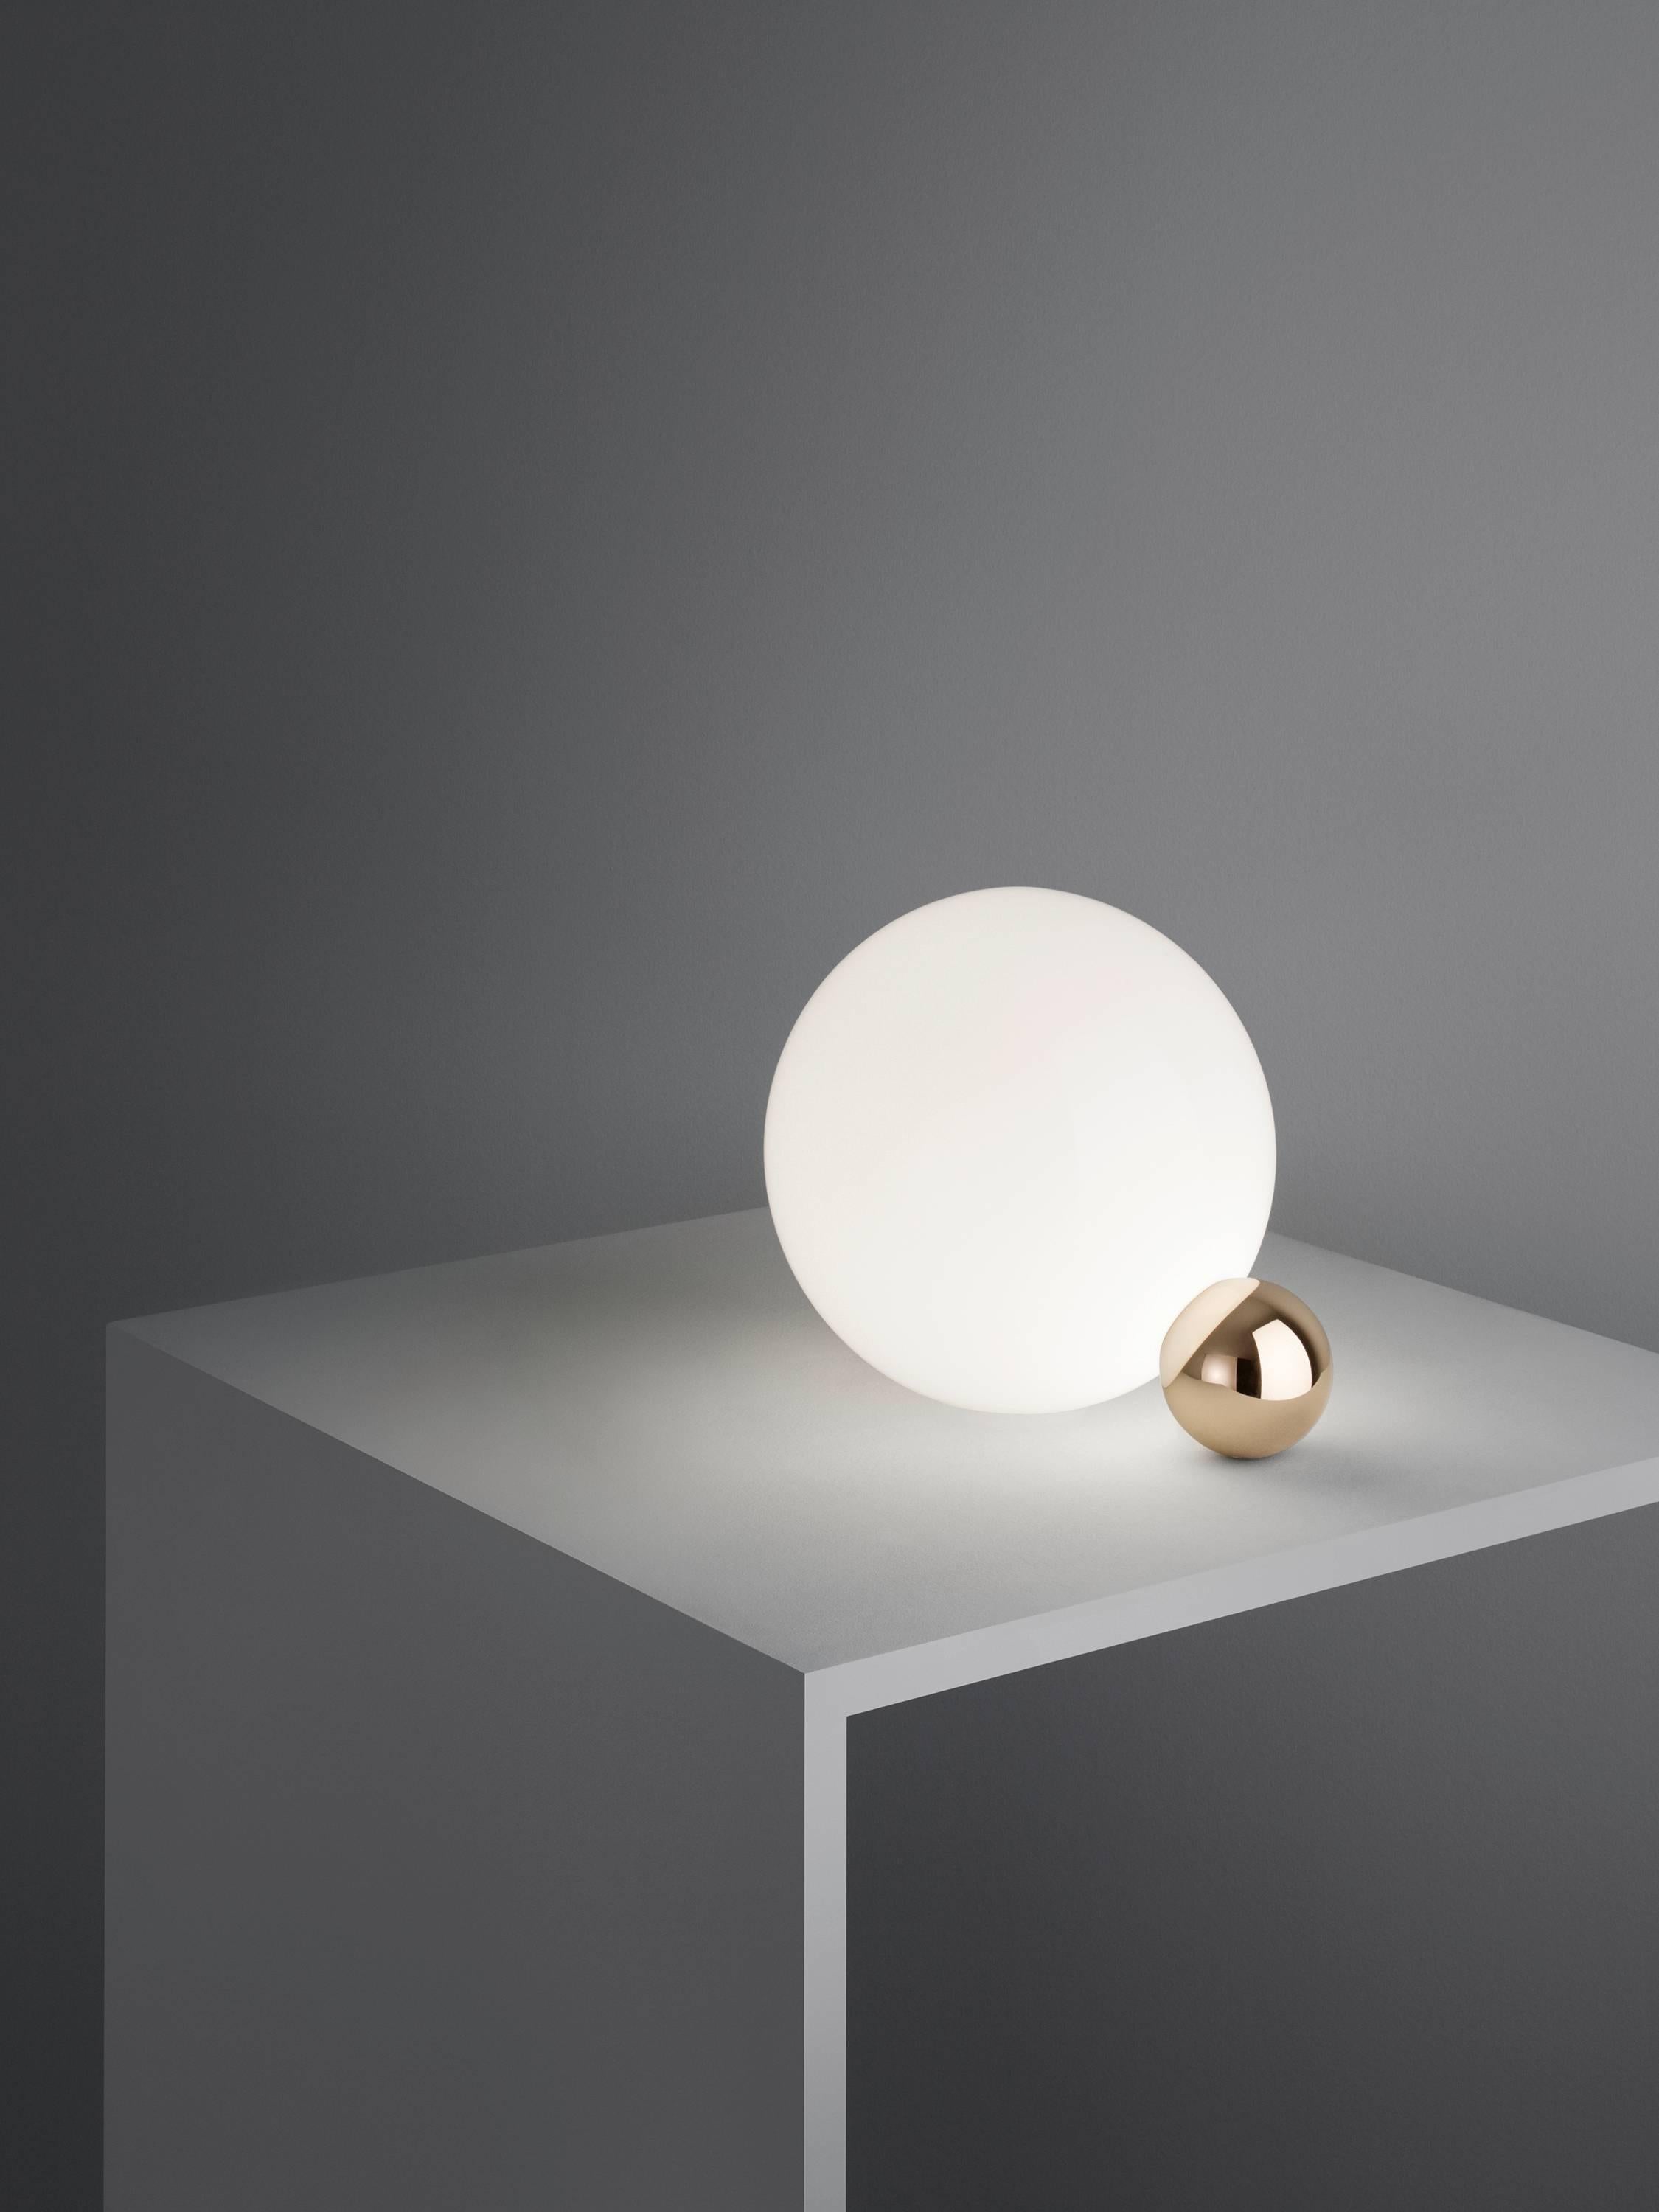 They say that imitation is the sincerest form of flattery, and with the Copycat table lamp designer Michael Anastassiades shows us just how sweet it can be. This fixture is made of two spheres connecting with each other, one small and in a precious